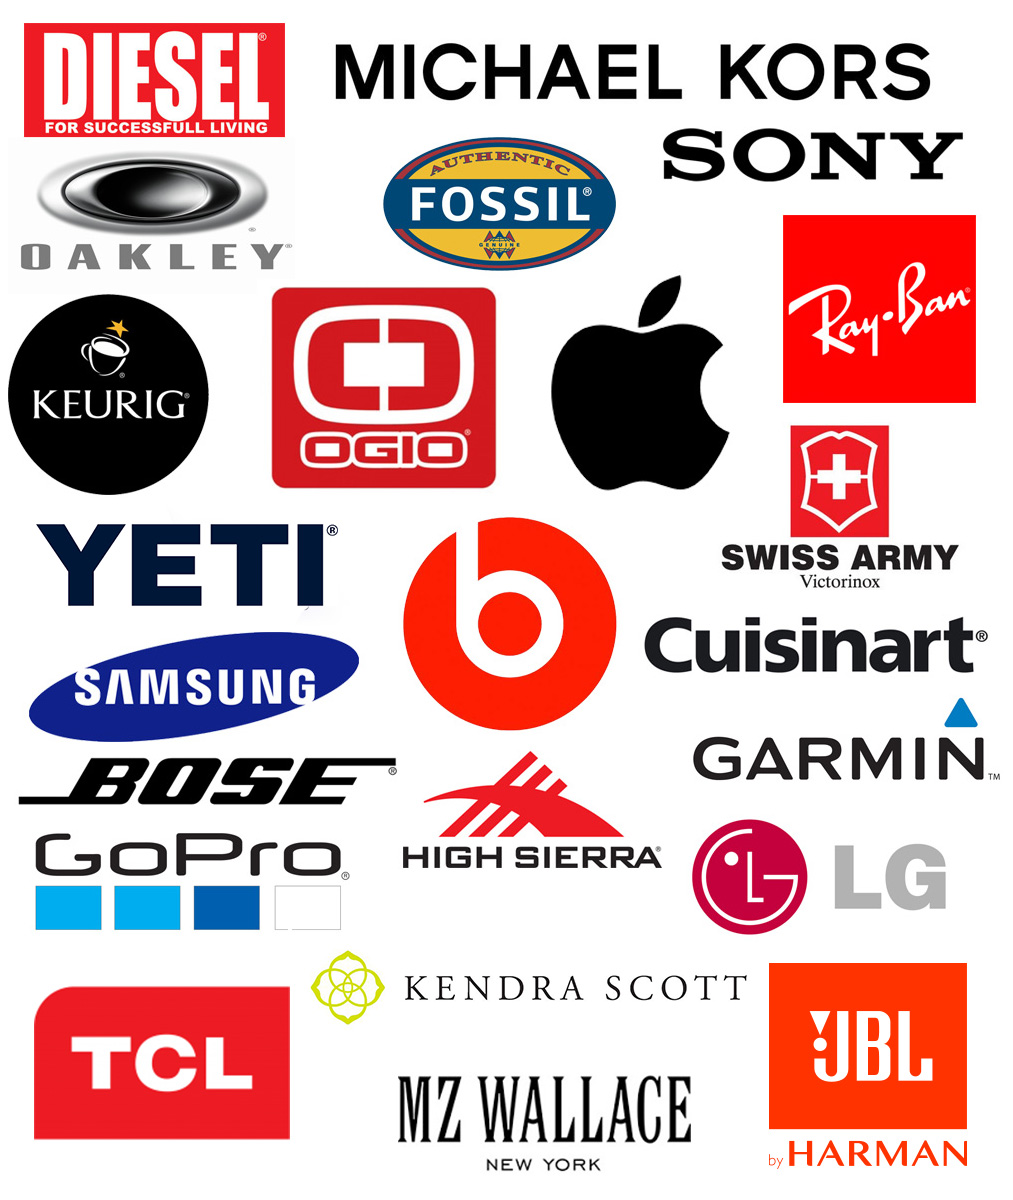 Brand names and product / service categories